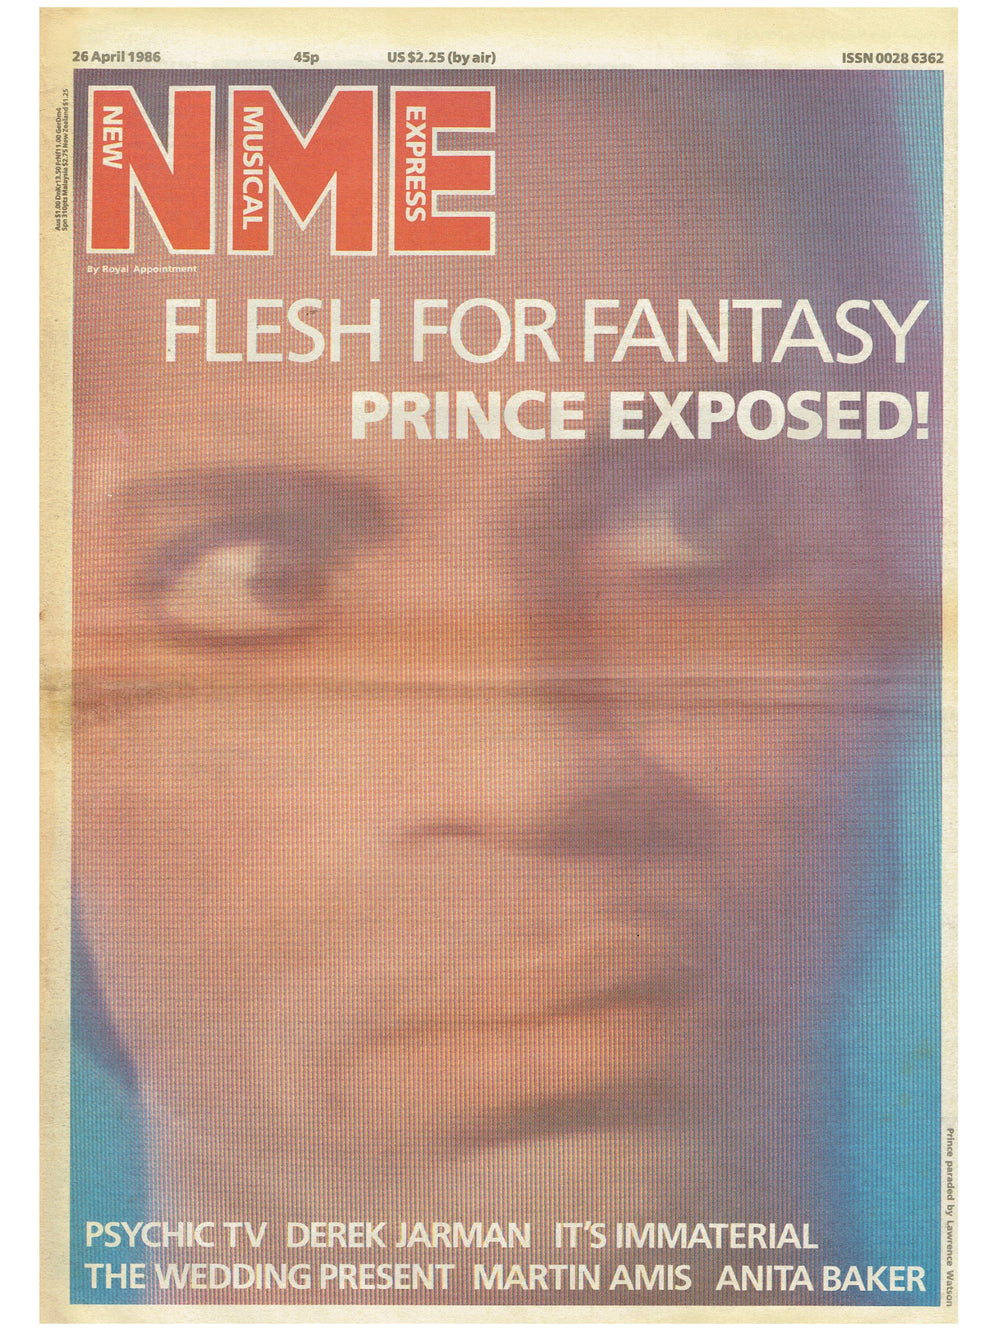 Prince – Flesh For Fantasy Full Page Cover Newspaper NME April 26th 1986